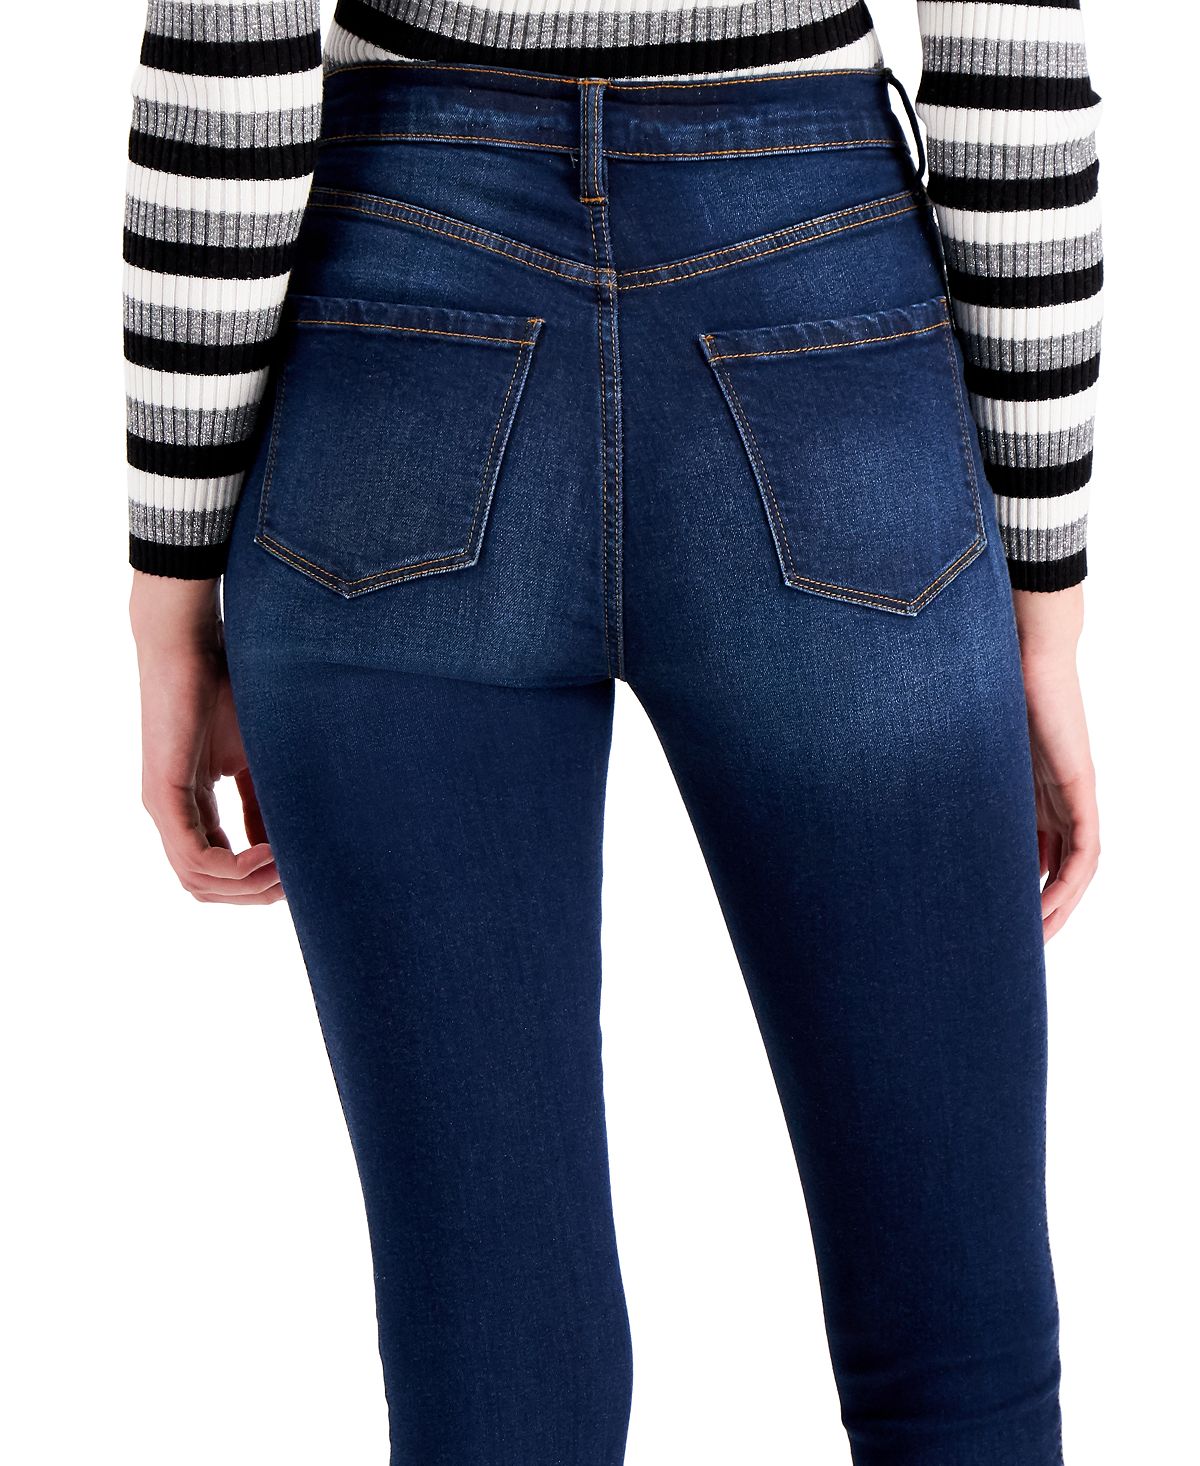 Celebrity Pink Juniors' Curvy High-rise Skinny Jeans Paseo